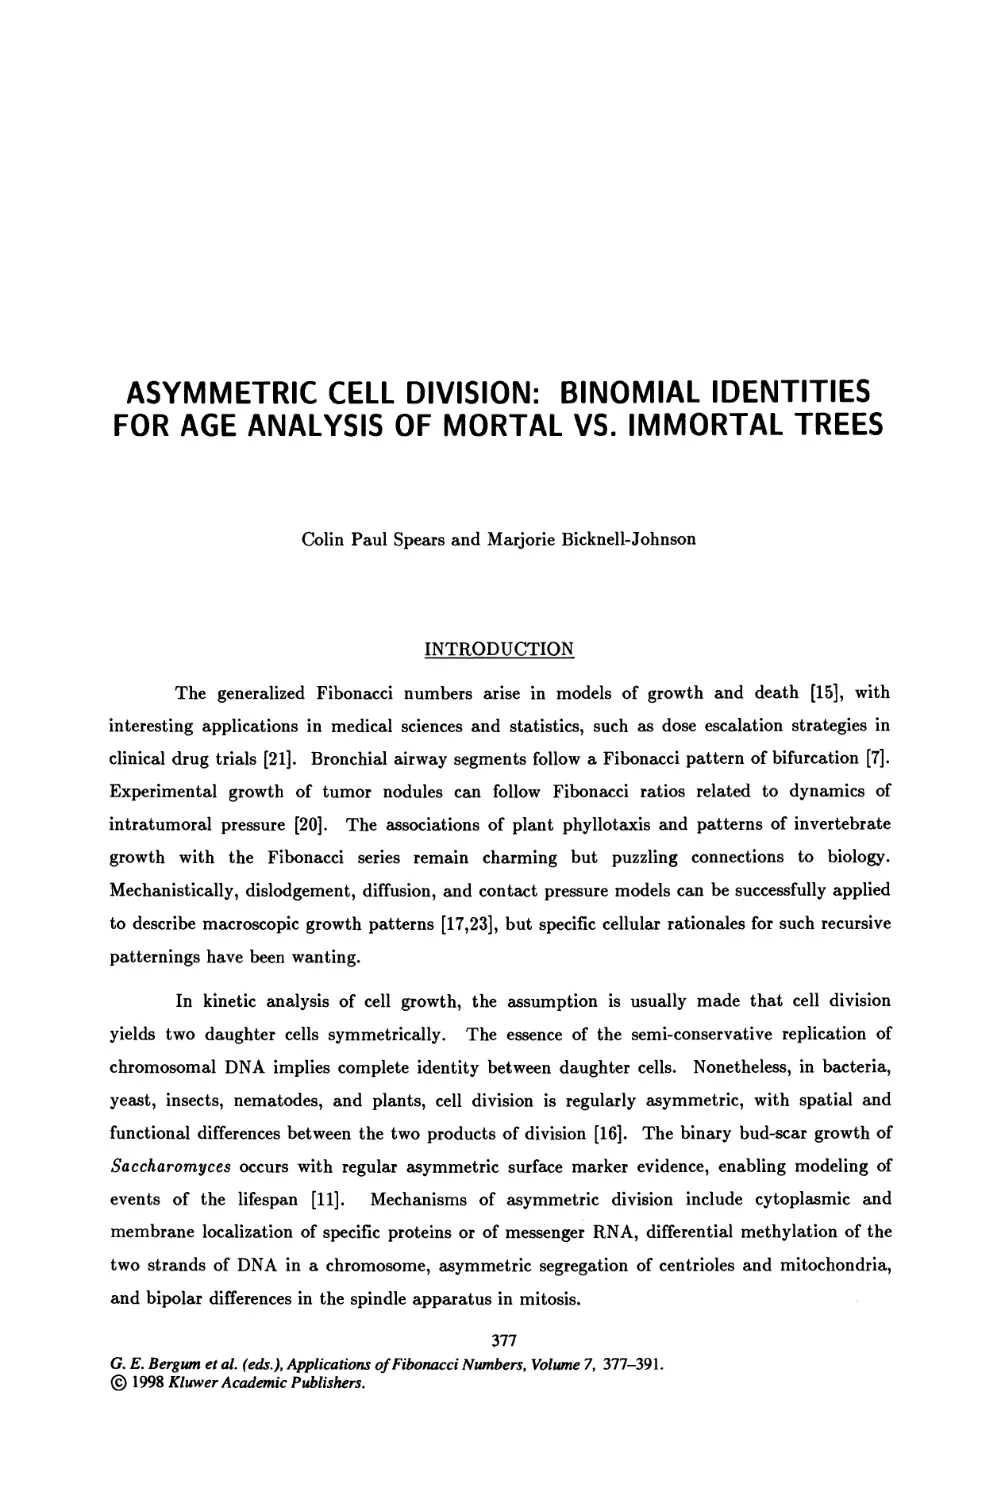 42. Asymmetric Cell Division: Binomial Identities for Age Analysis of Mortal vs. Immortal Trees